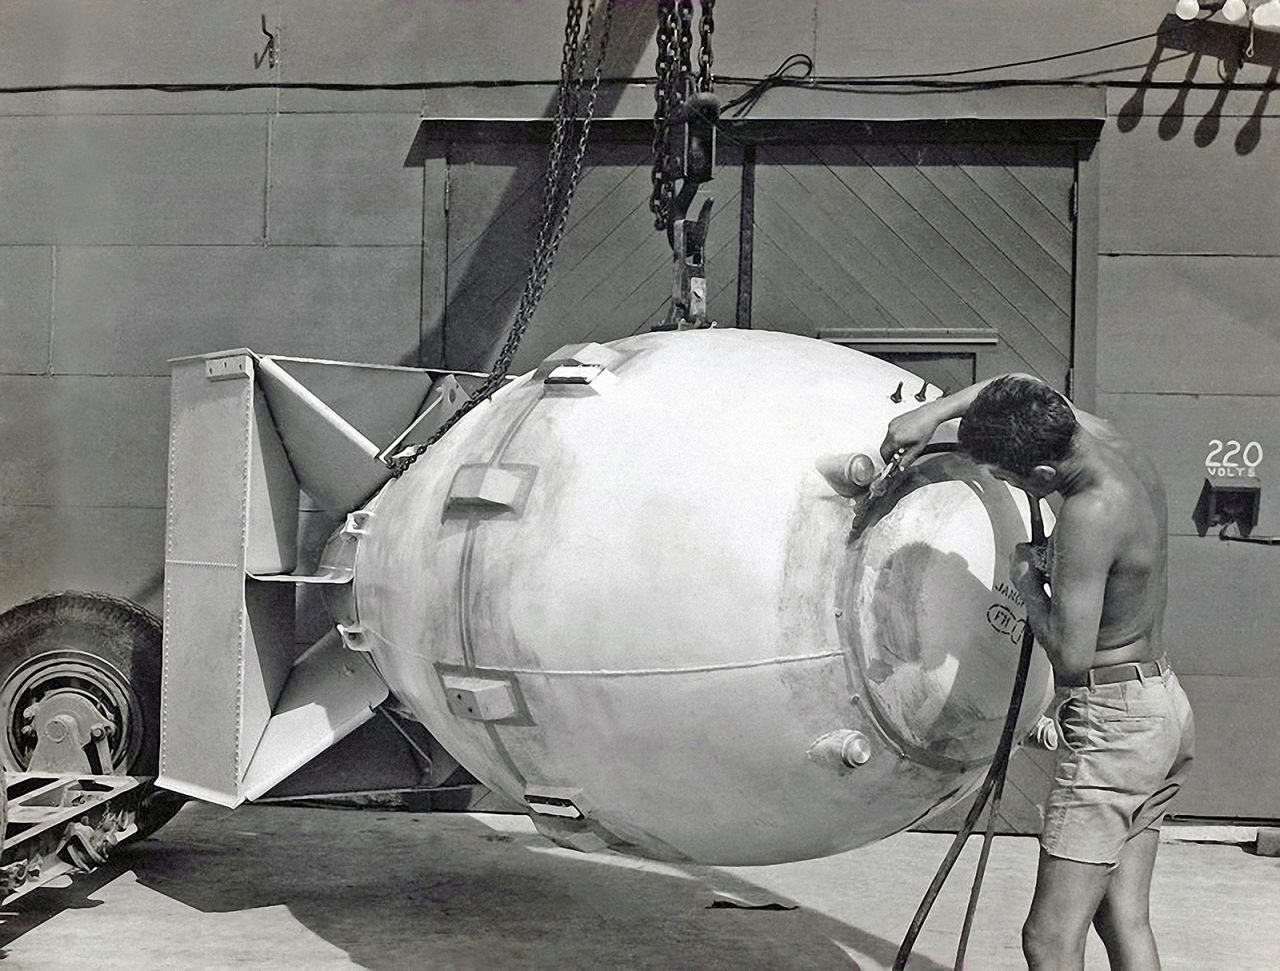 A worker stands next to an atomic bomb, code name "Fat Man," hours before it was dropped on Nagasaki, Japan, on August 9, 1945. The Hiroshima bomb was nicknamed "Little Boy."